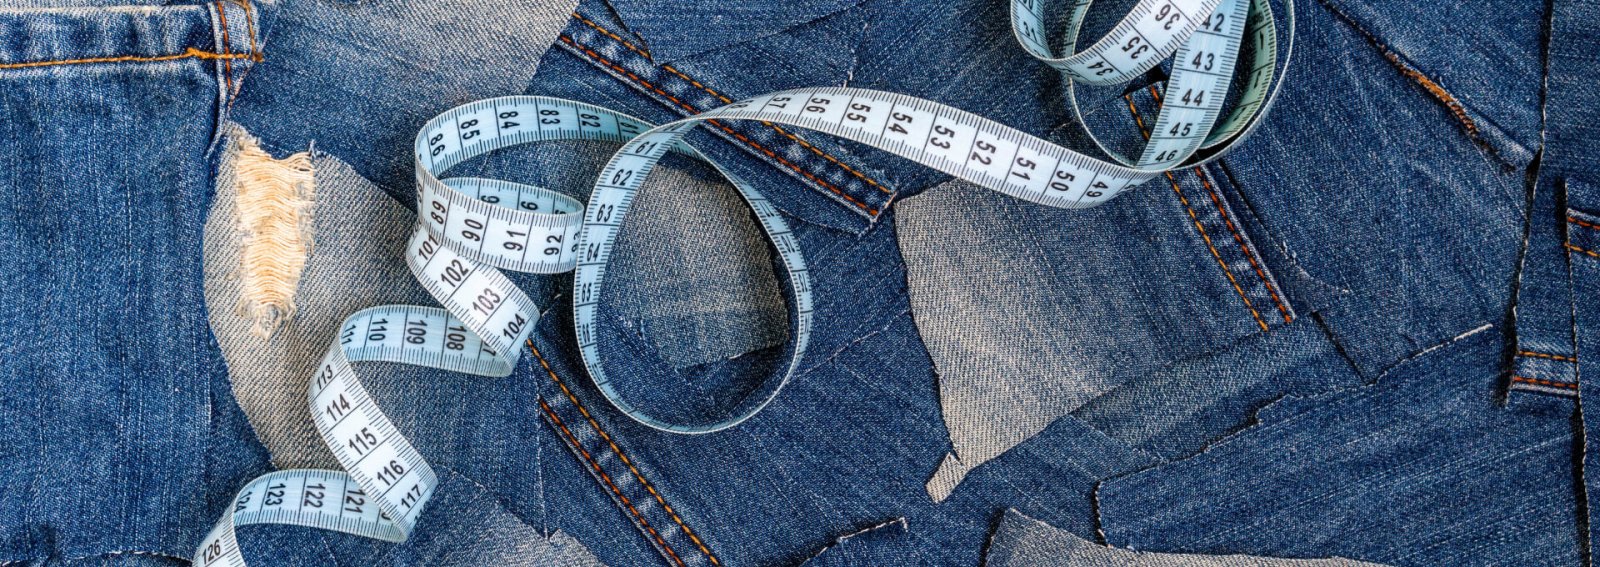 What to Do with Old Jeans: 5 Creative Upcycling Ideas